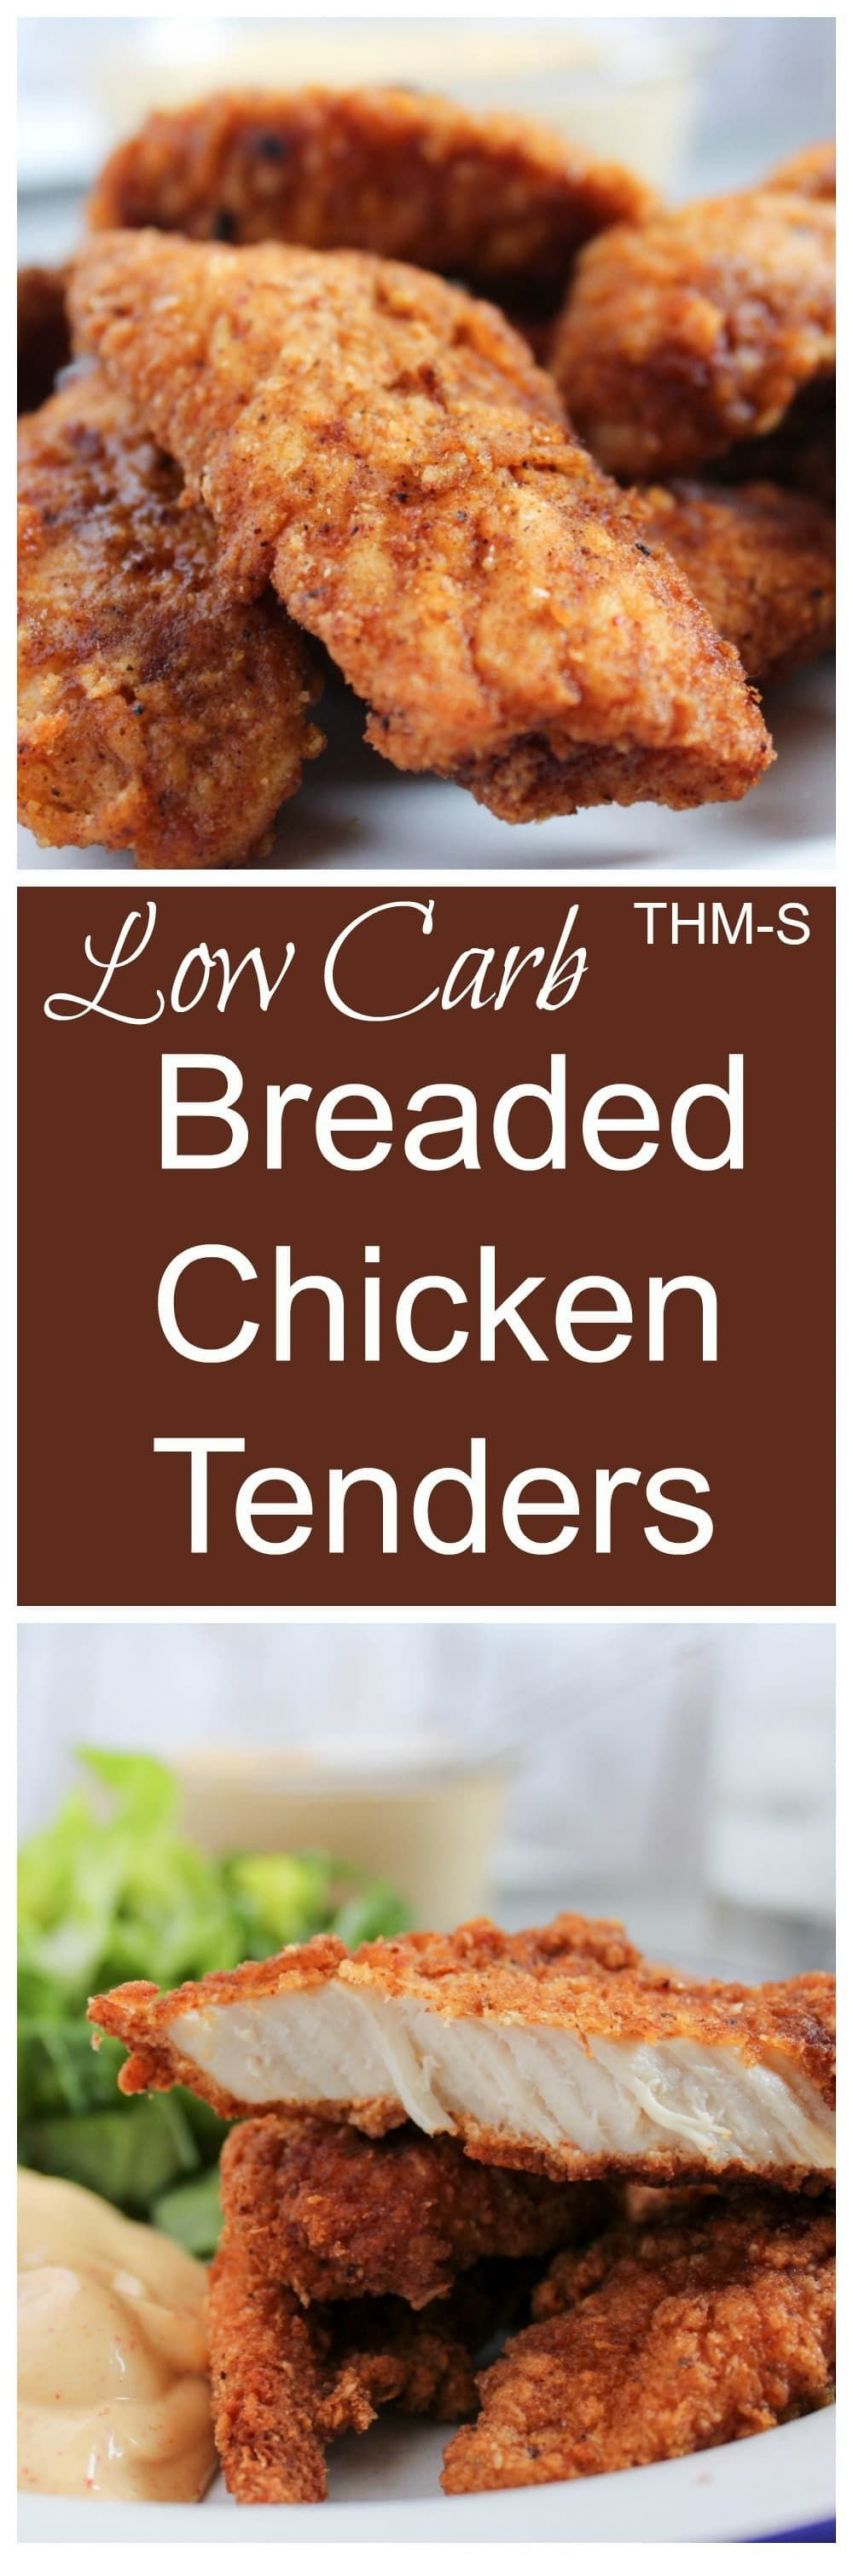 Low Carb Breaded Chicken Tenders
 Restaurant Style Breaded Chicken Tenders THM S Low Carb